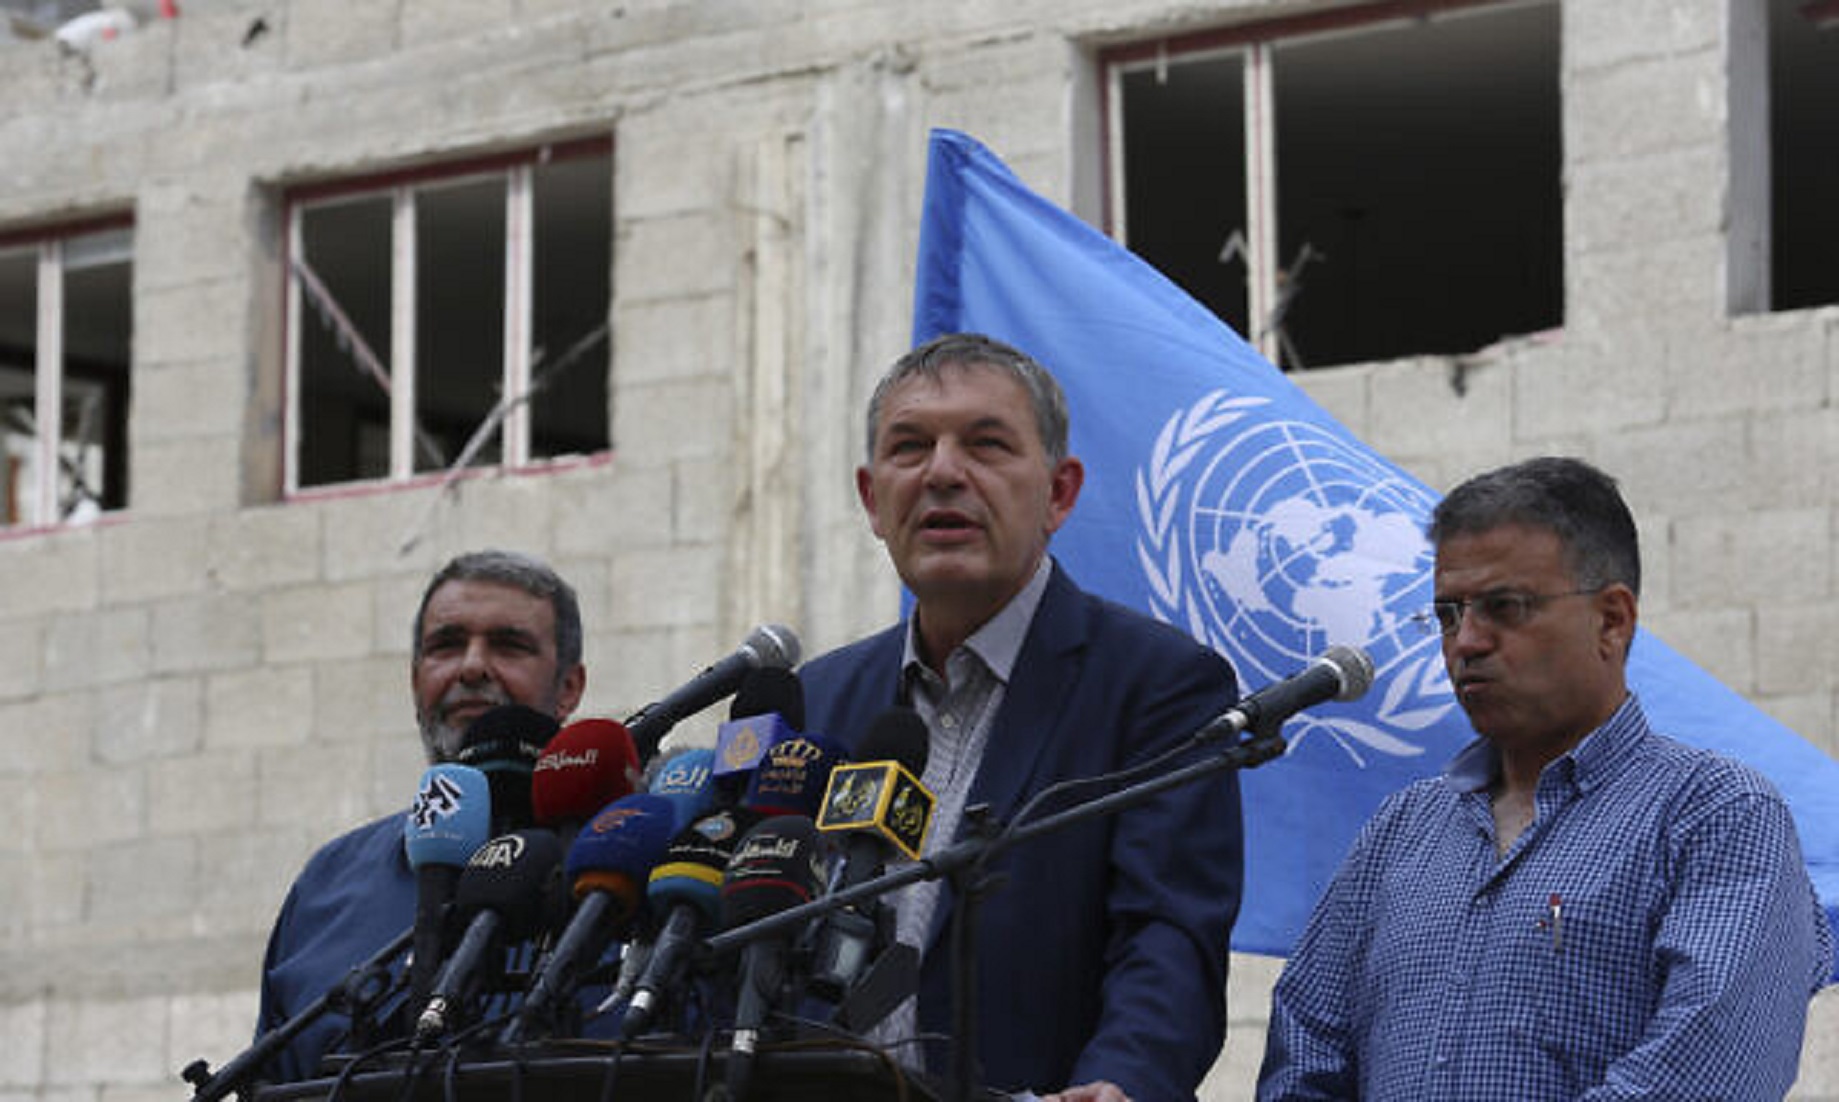 UN Agency For Palestine Refugees Faces 100-Million-USD Funding Gap: Chief